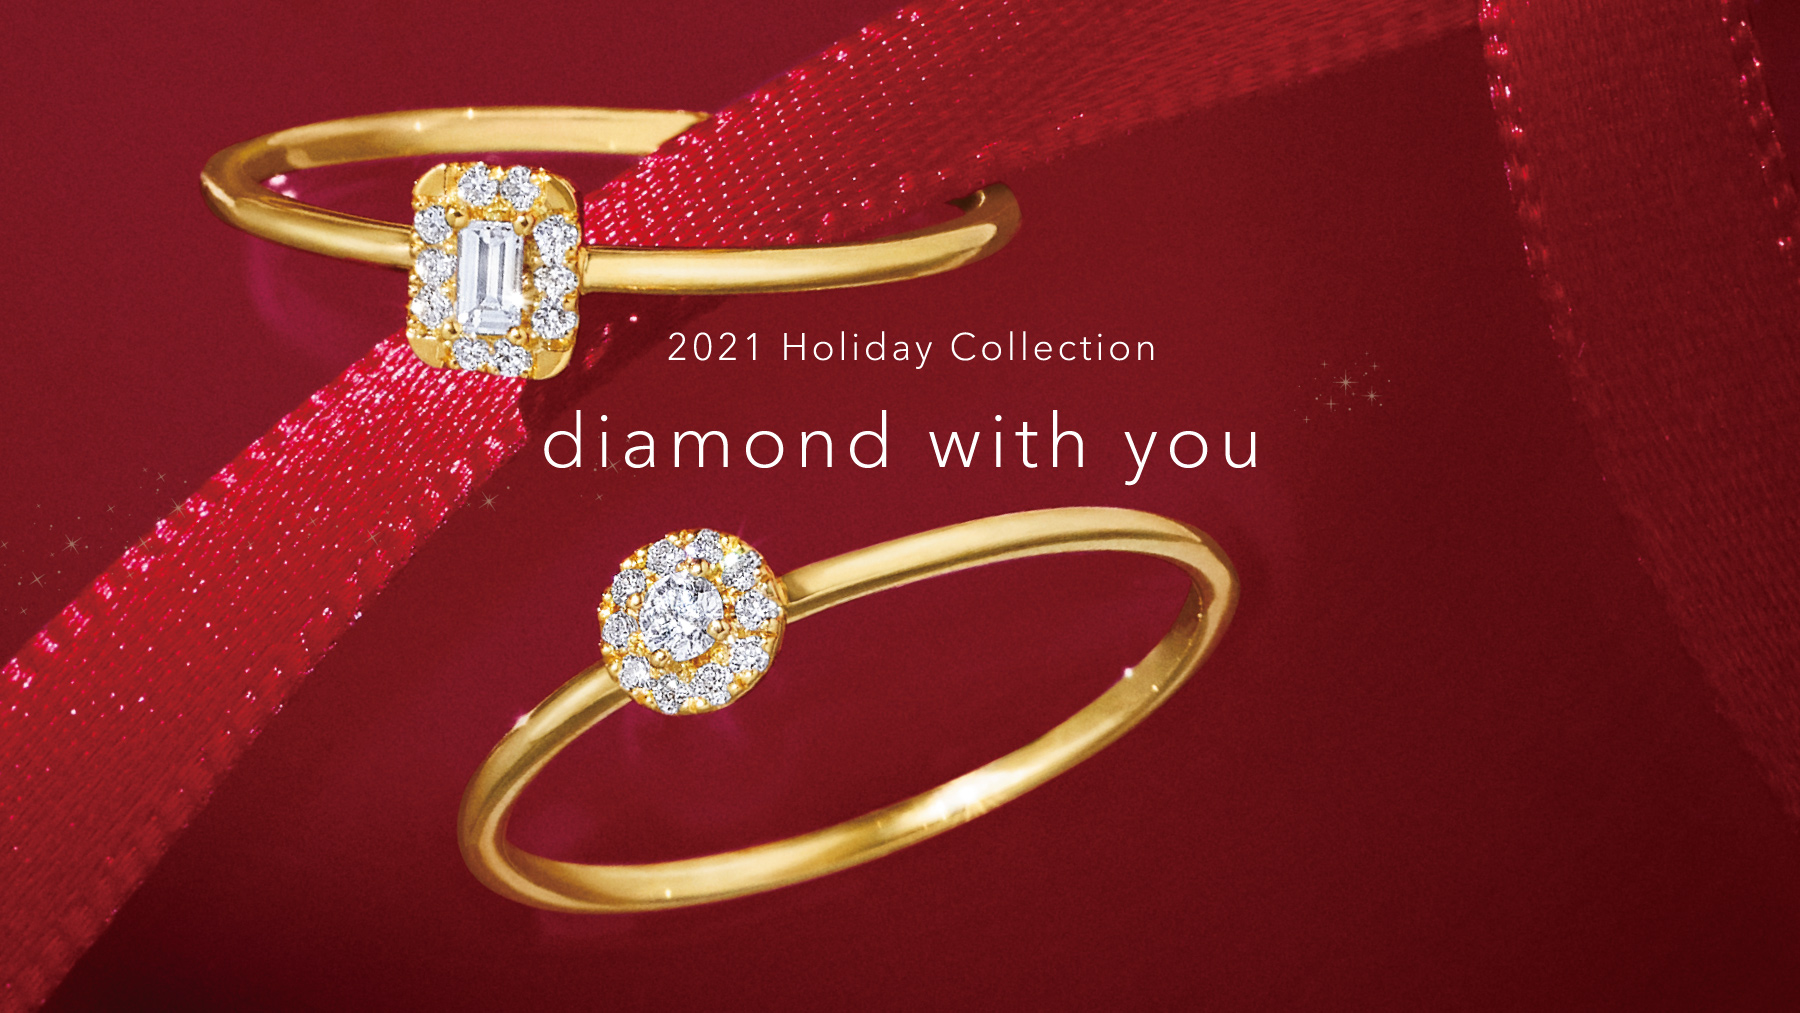 2021 Holiday Collection, diamond with you